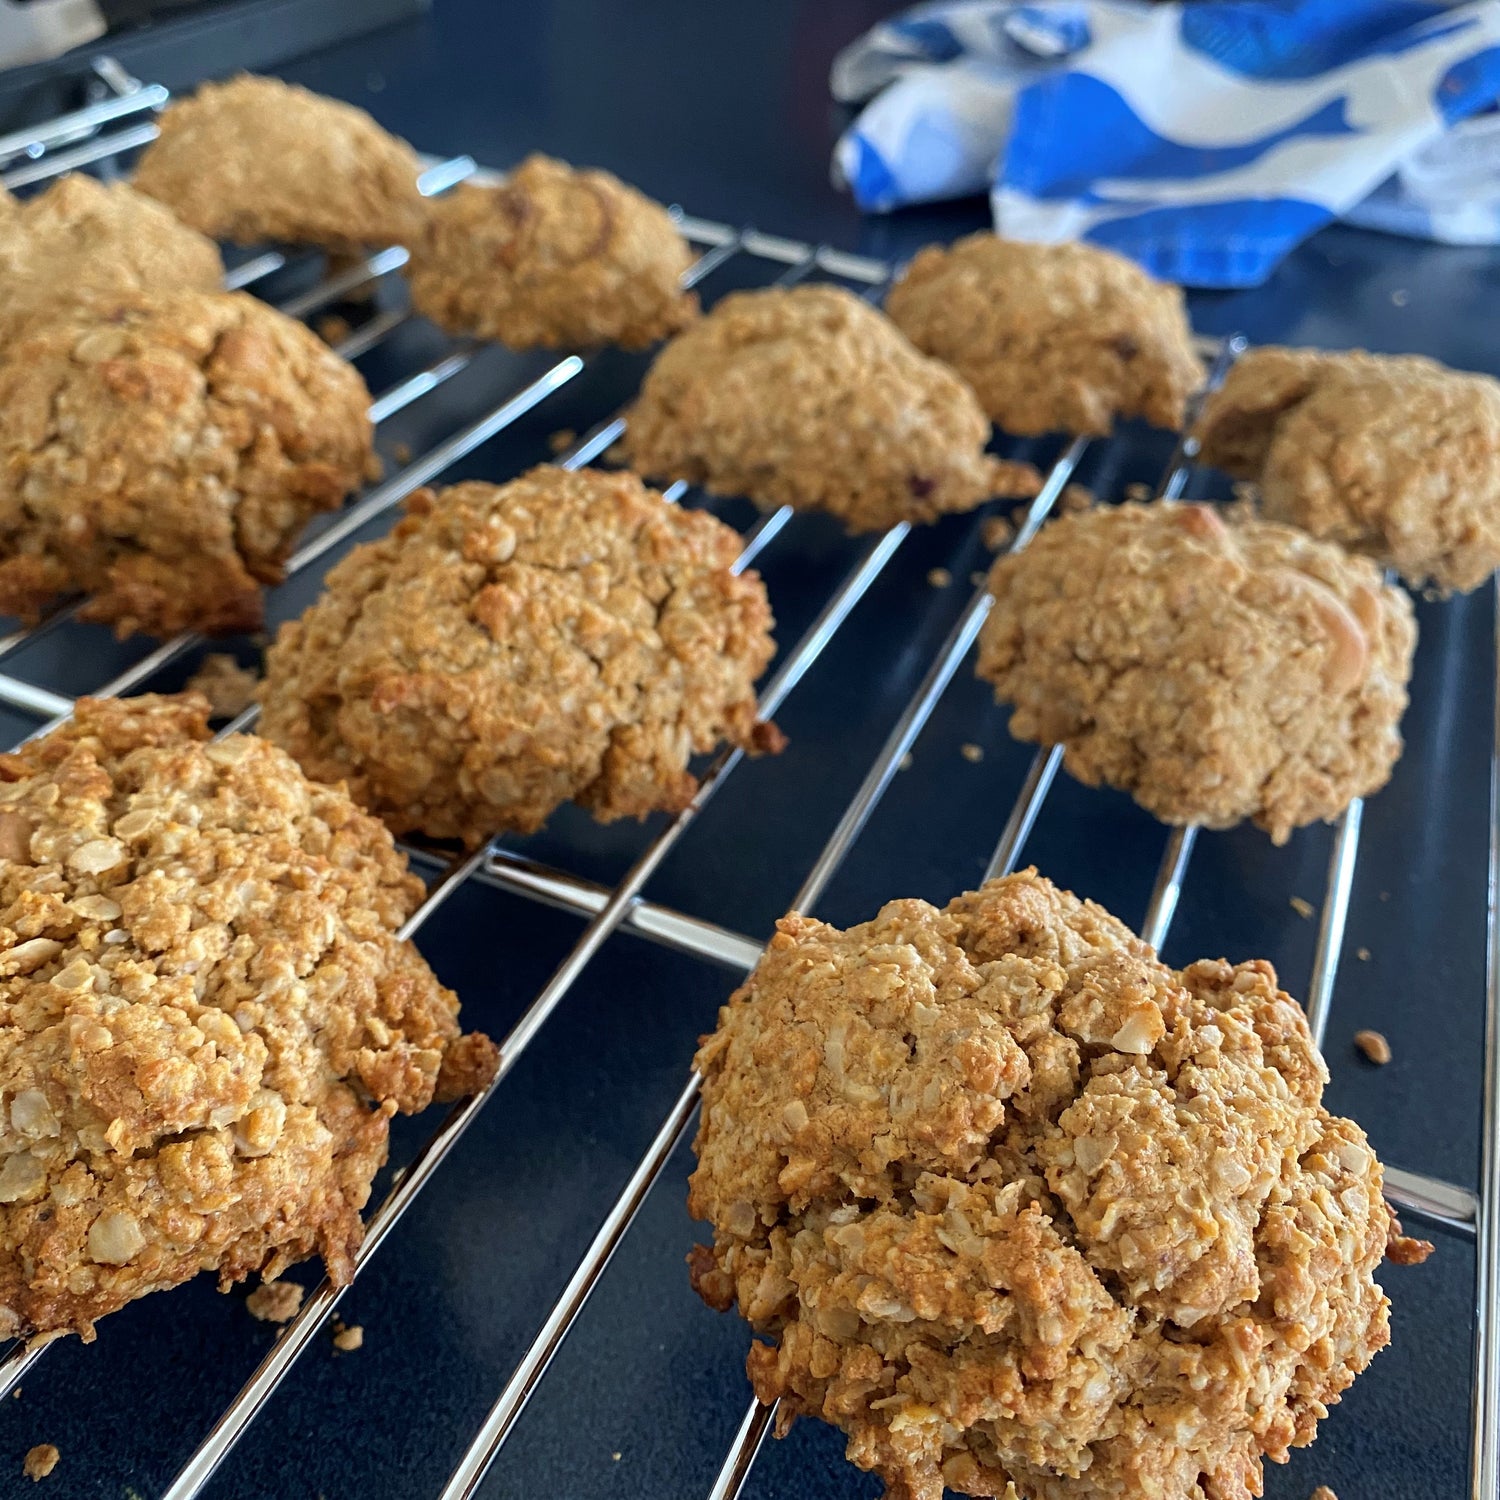 Peanut Butter Chocolate Oatmeal Cookies